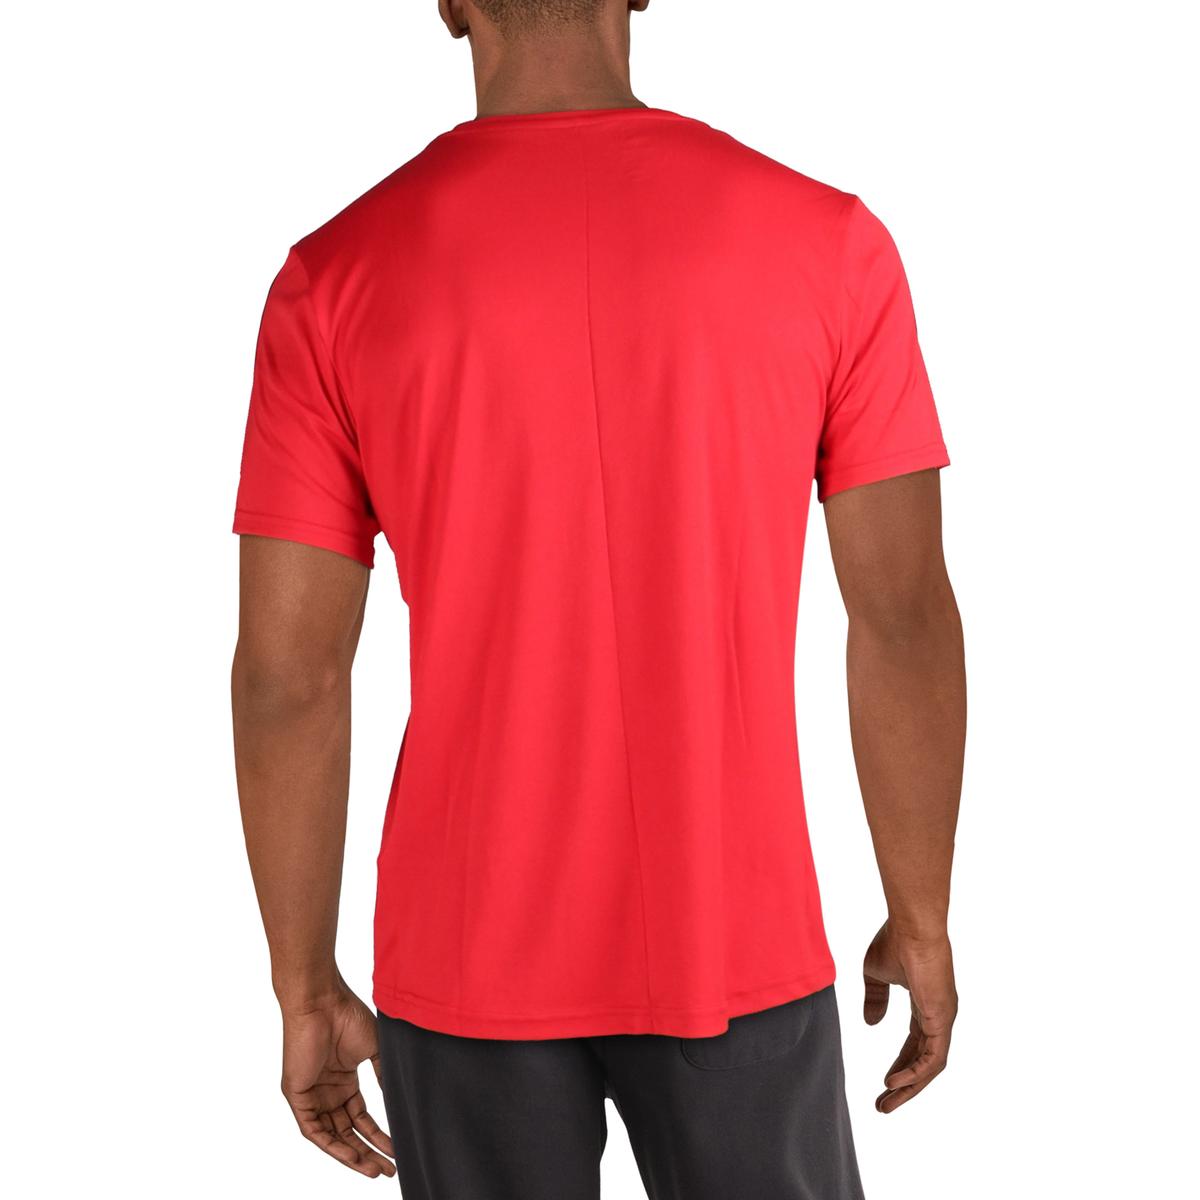 30 Minute Red Workout Shirt with Comfort Workout Clothes